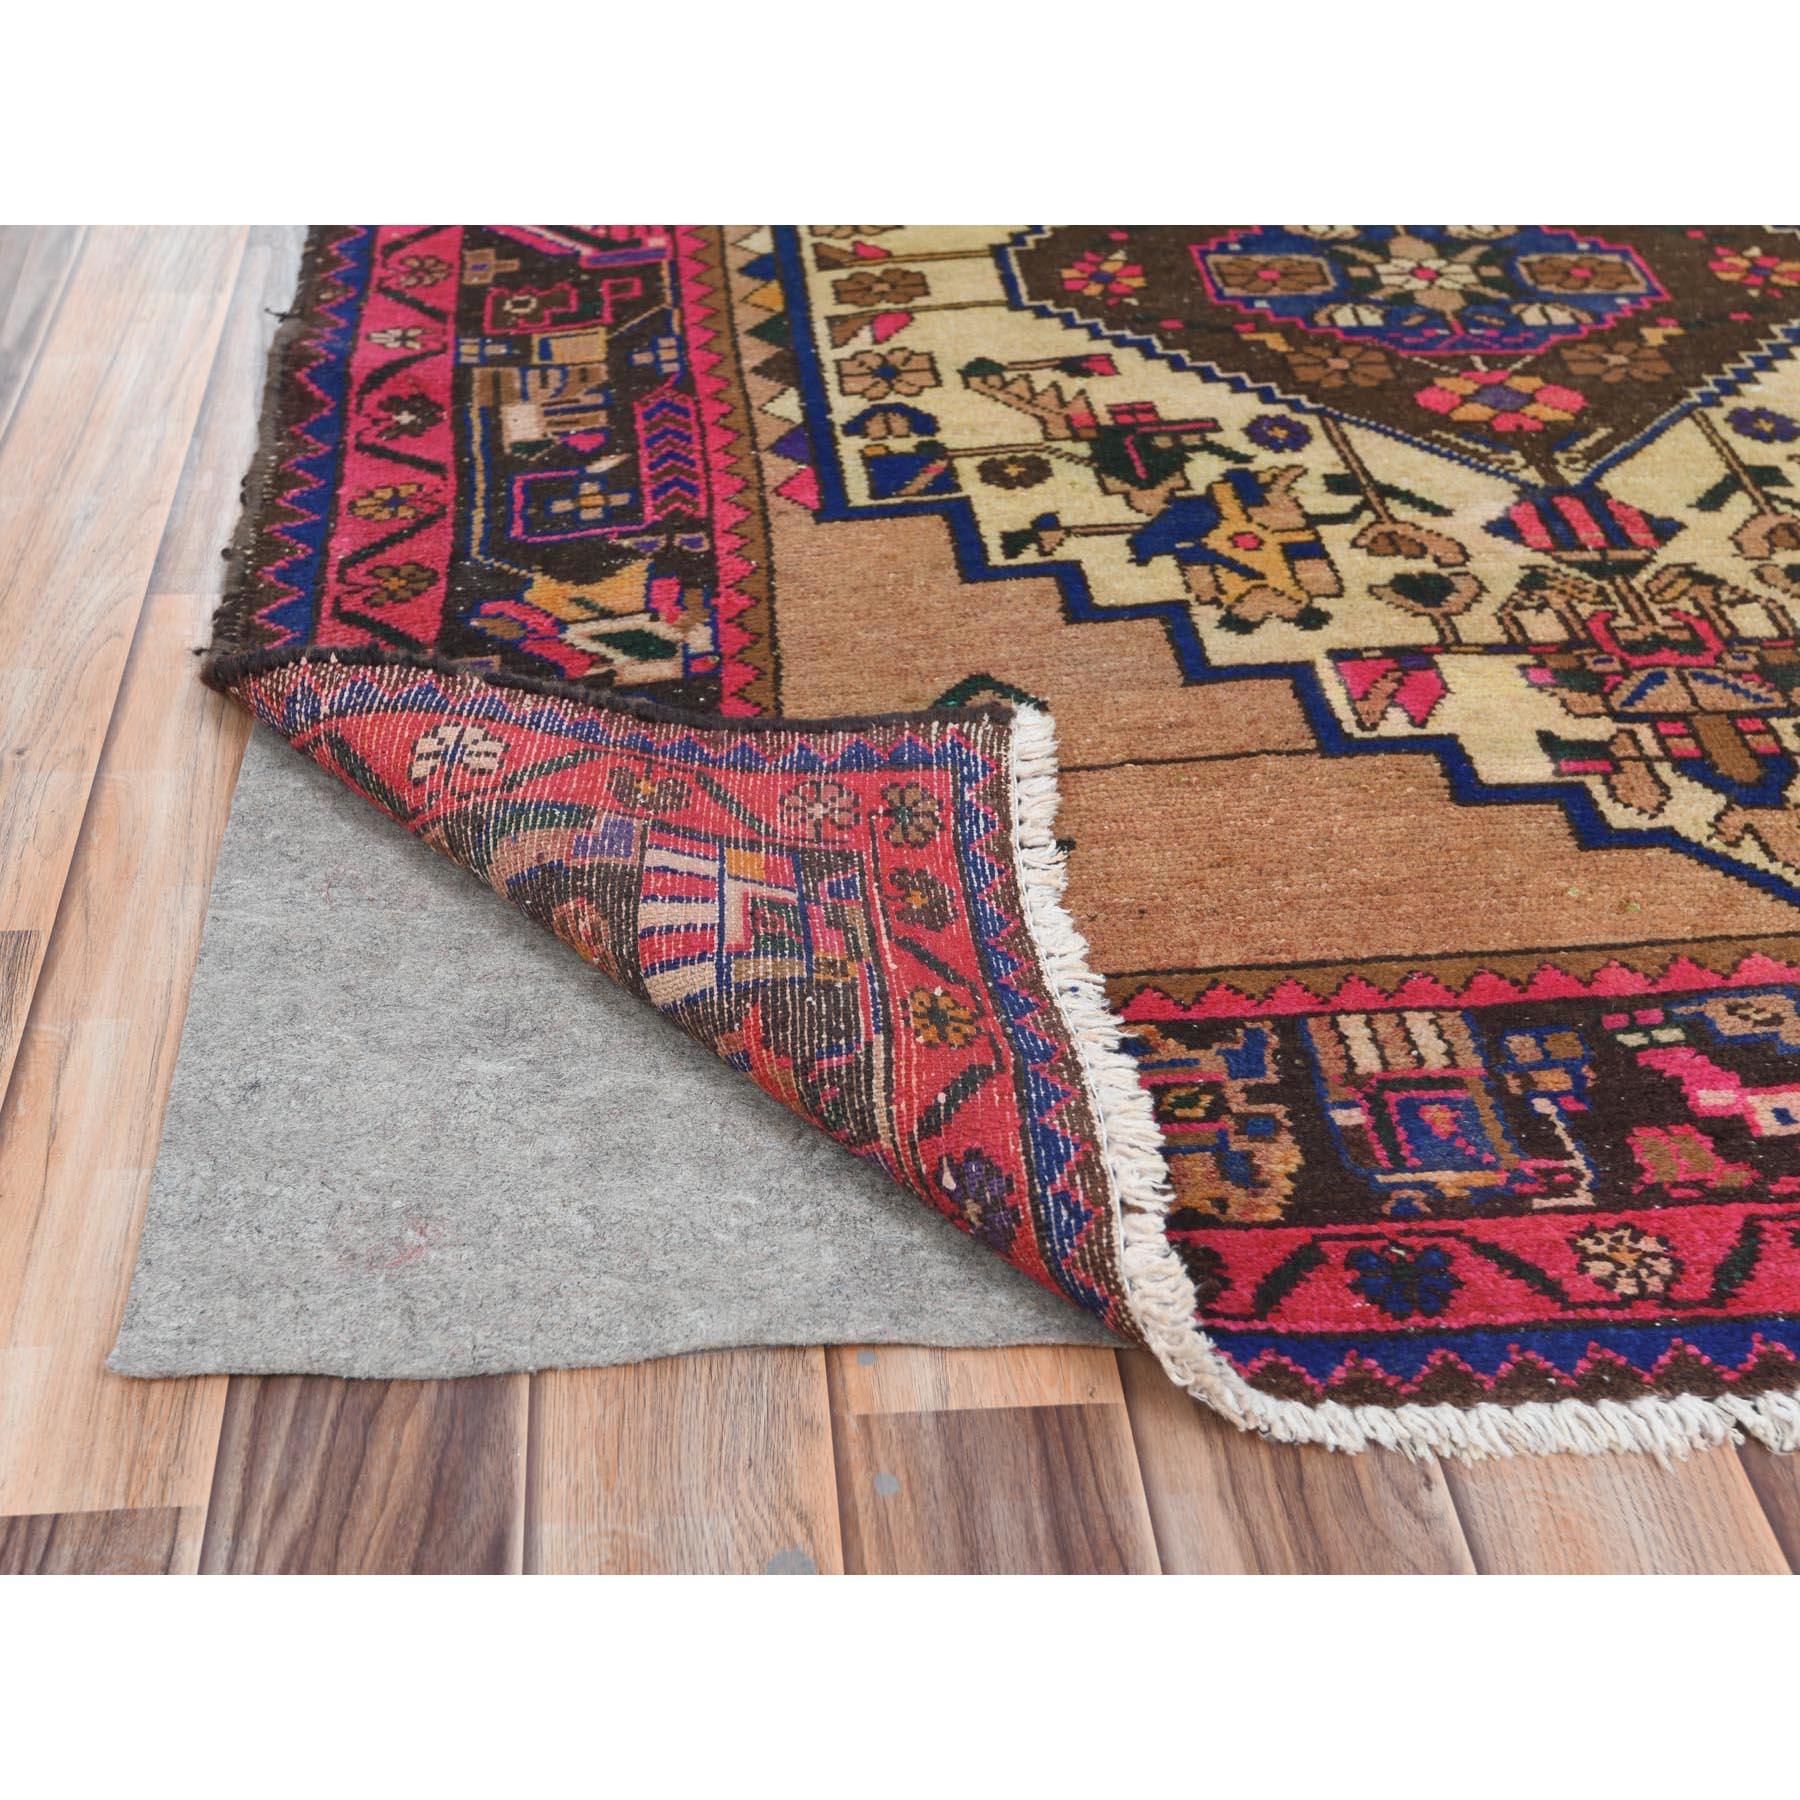 Medieval Peach Color Vintage Persian Nahavand Distressed Look Worn Wool Hand Knotted Rug For Sale